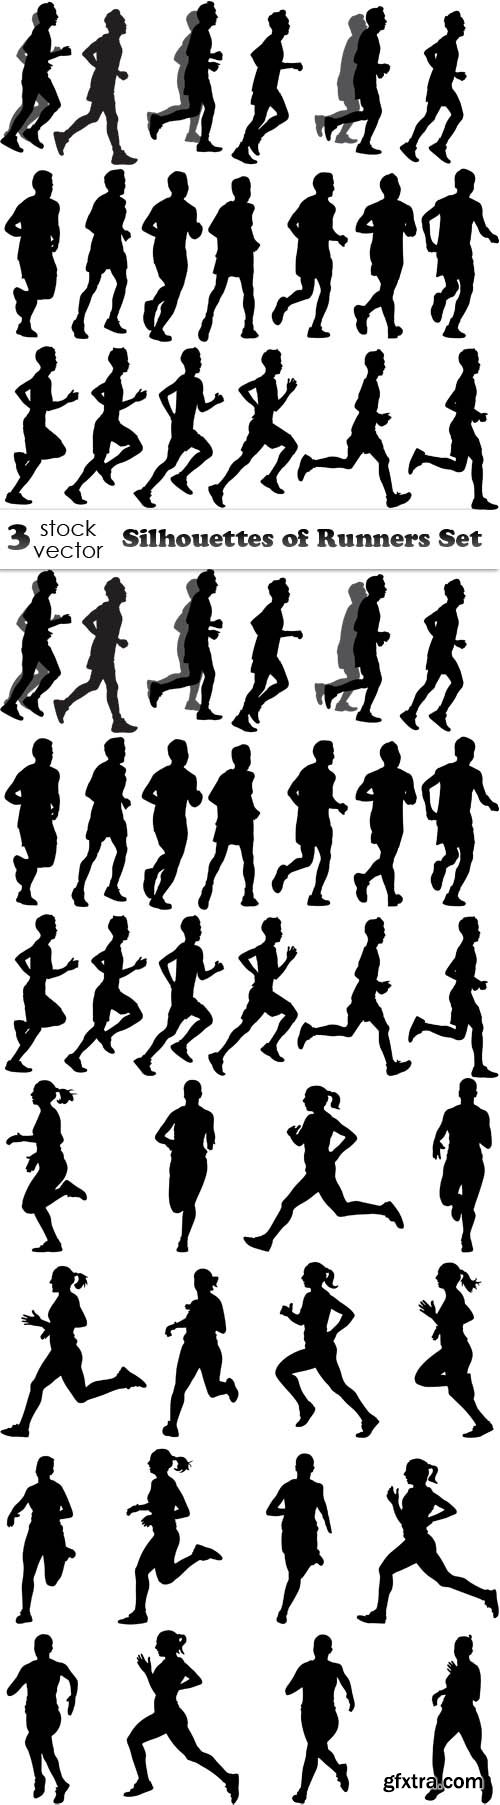 Vectors - Silhouettes of Runners Set